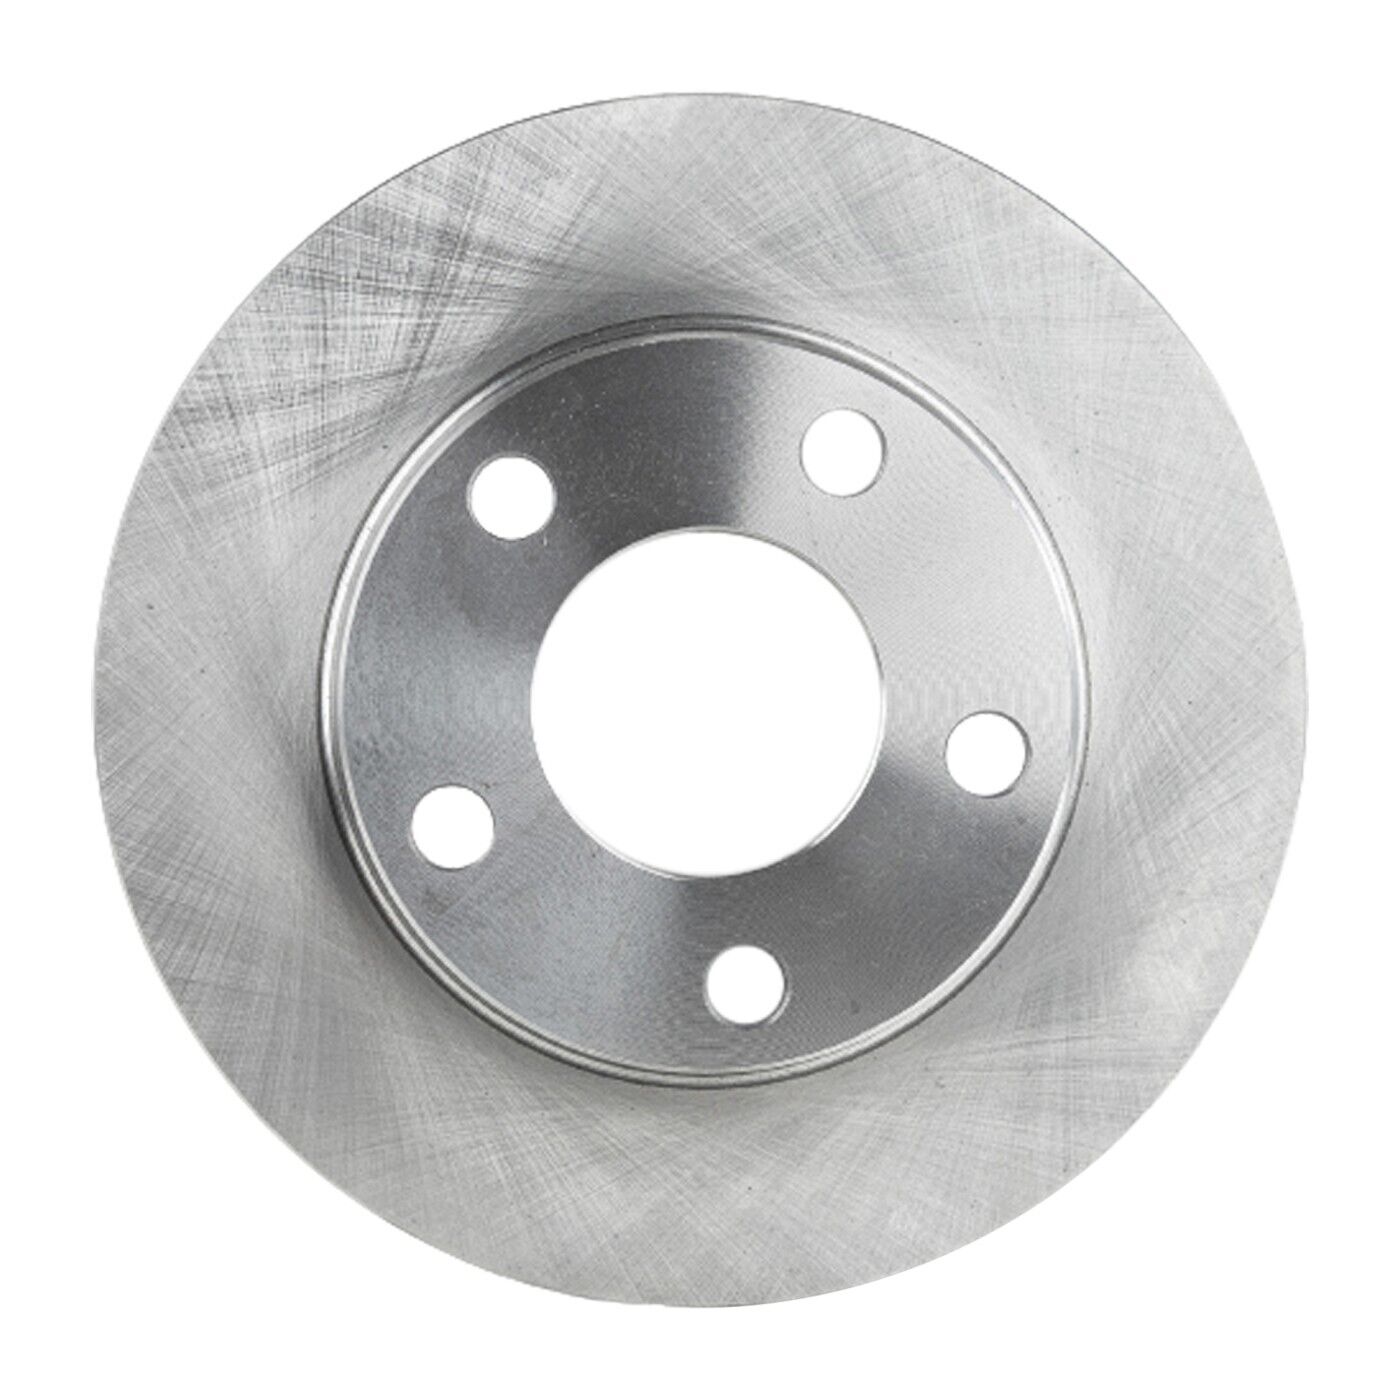 Disc Brake Rotor For 1998-2004 Audi A6 Quattro Rear Left or Right Solid 1 Pc